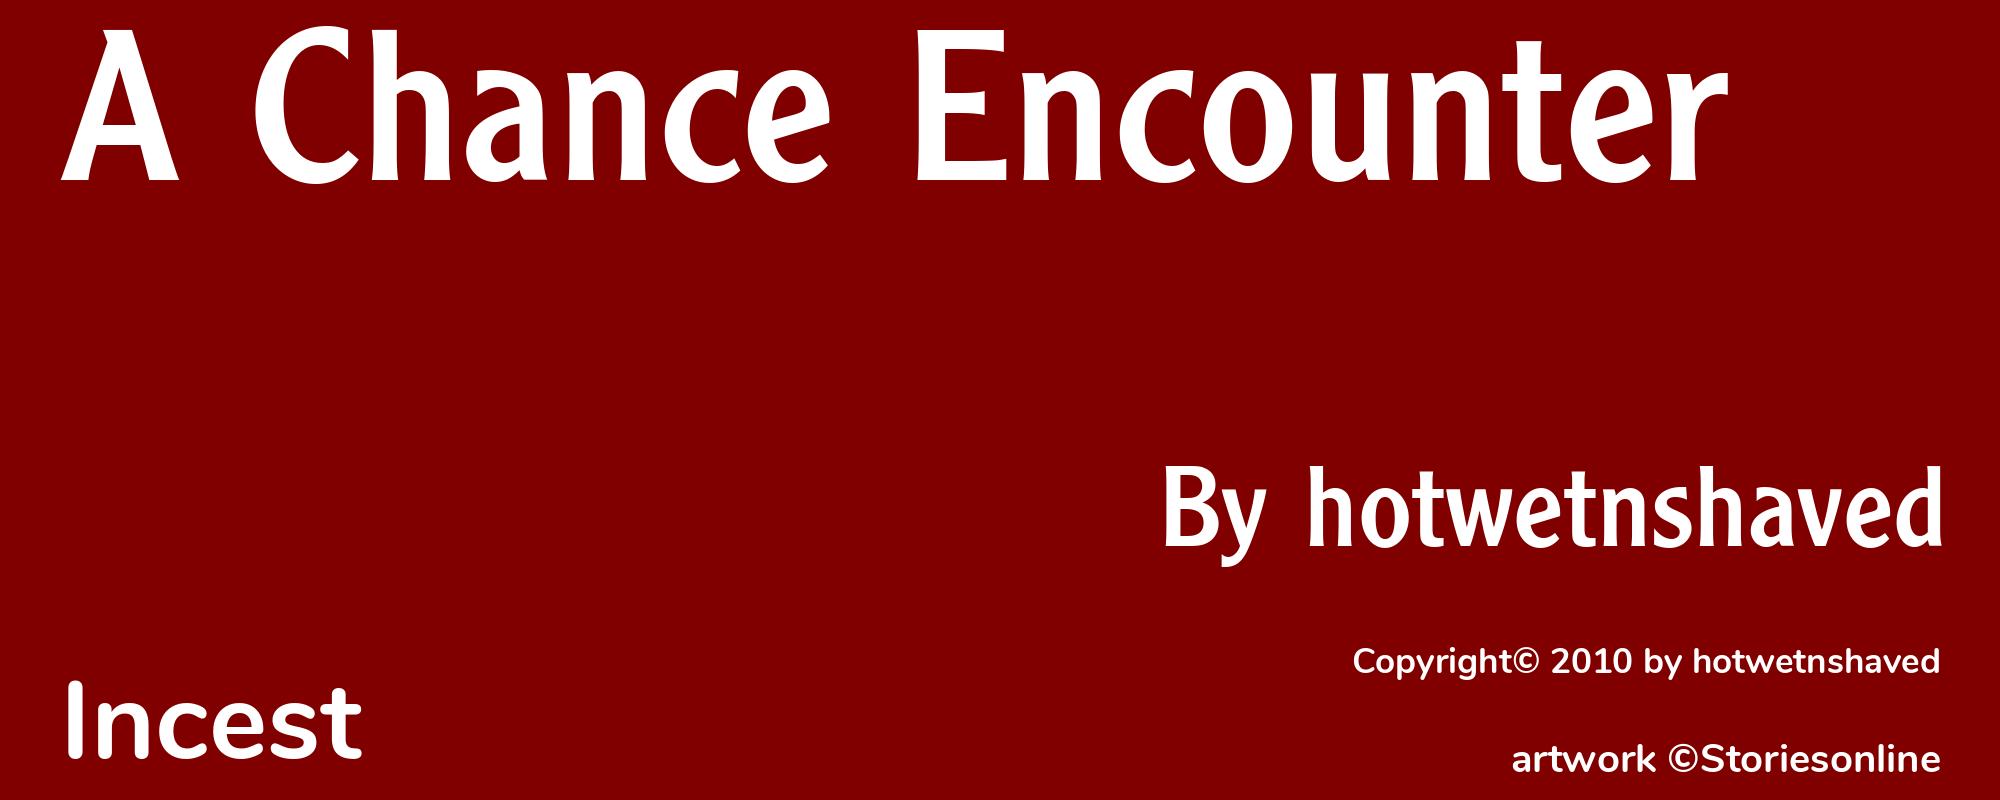 A Chance Encounter - Cover